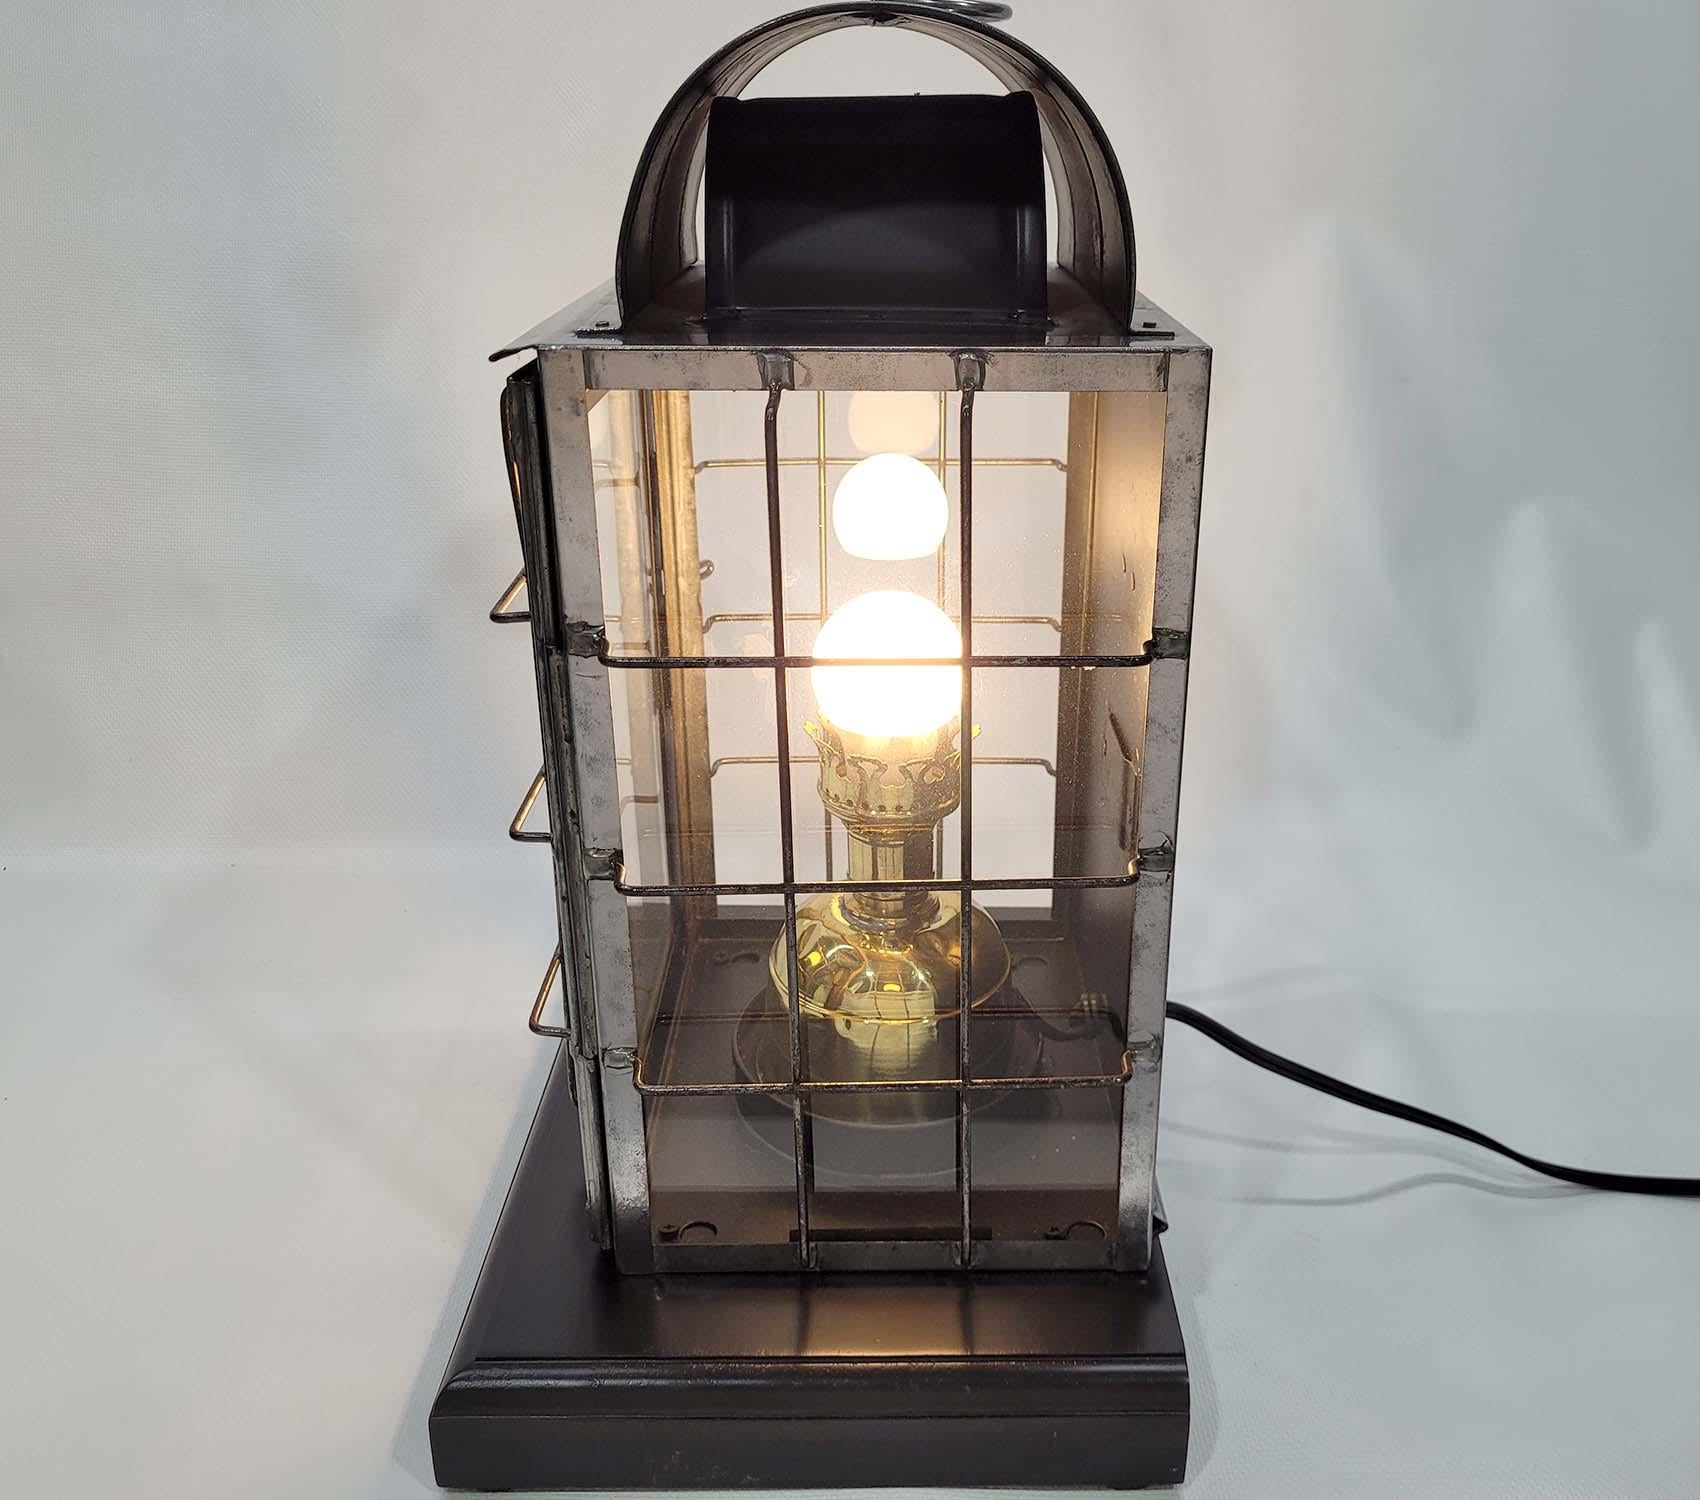 Early 20th Century National Marine Lamp Company Cabin Lantern For Sale